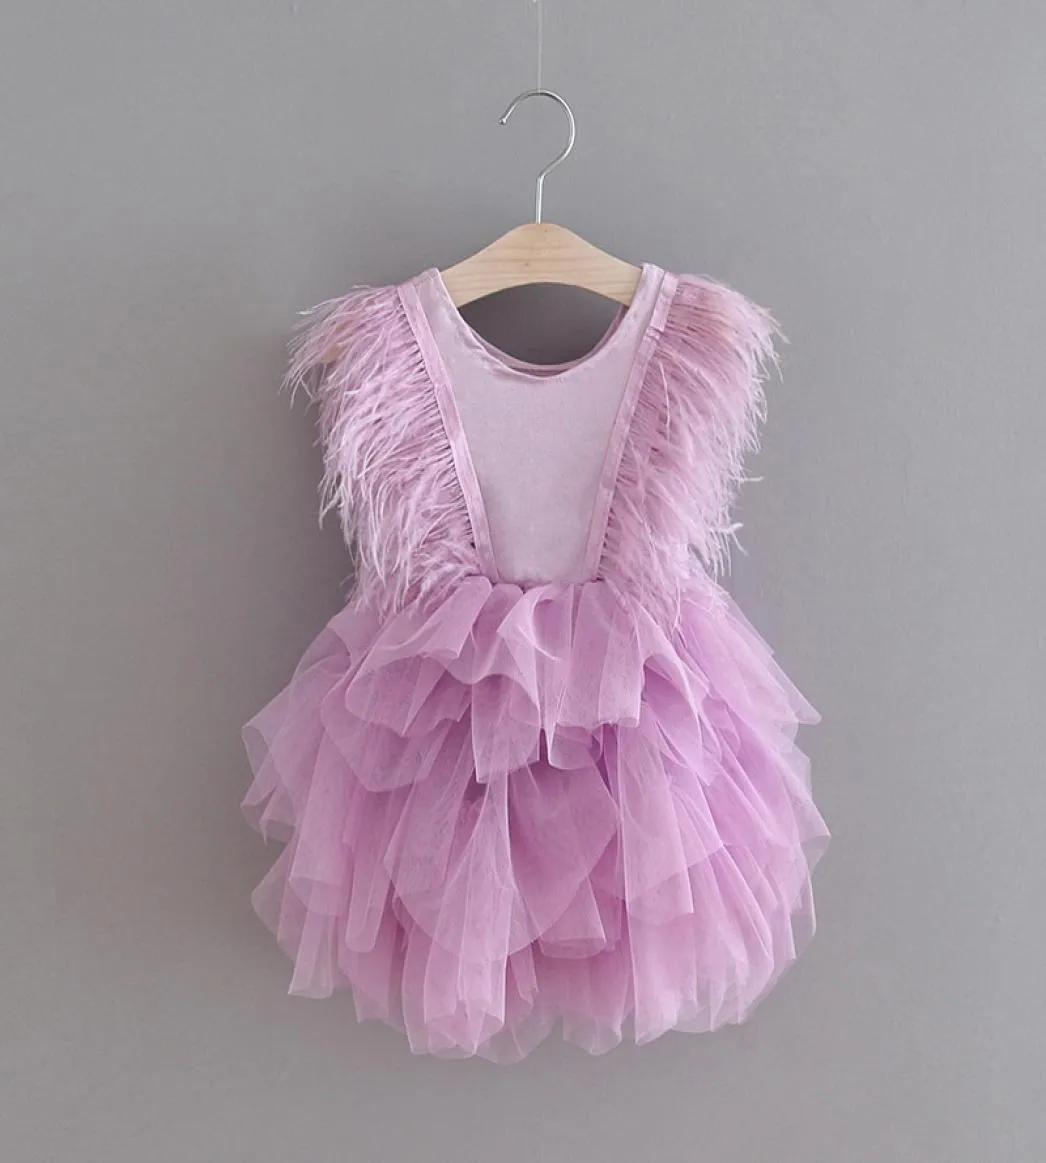 RETAIL 2020 NEW V Neck Feather Fluffy Tulle Cake Dress Princess Dresses For Wedding Show Baby Clothes E19553026185